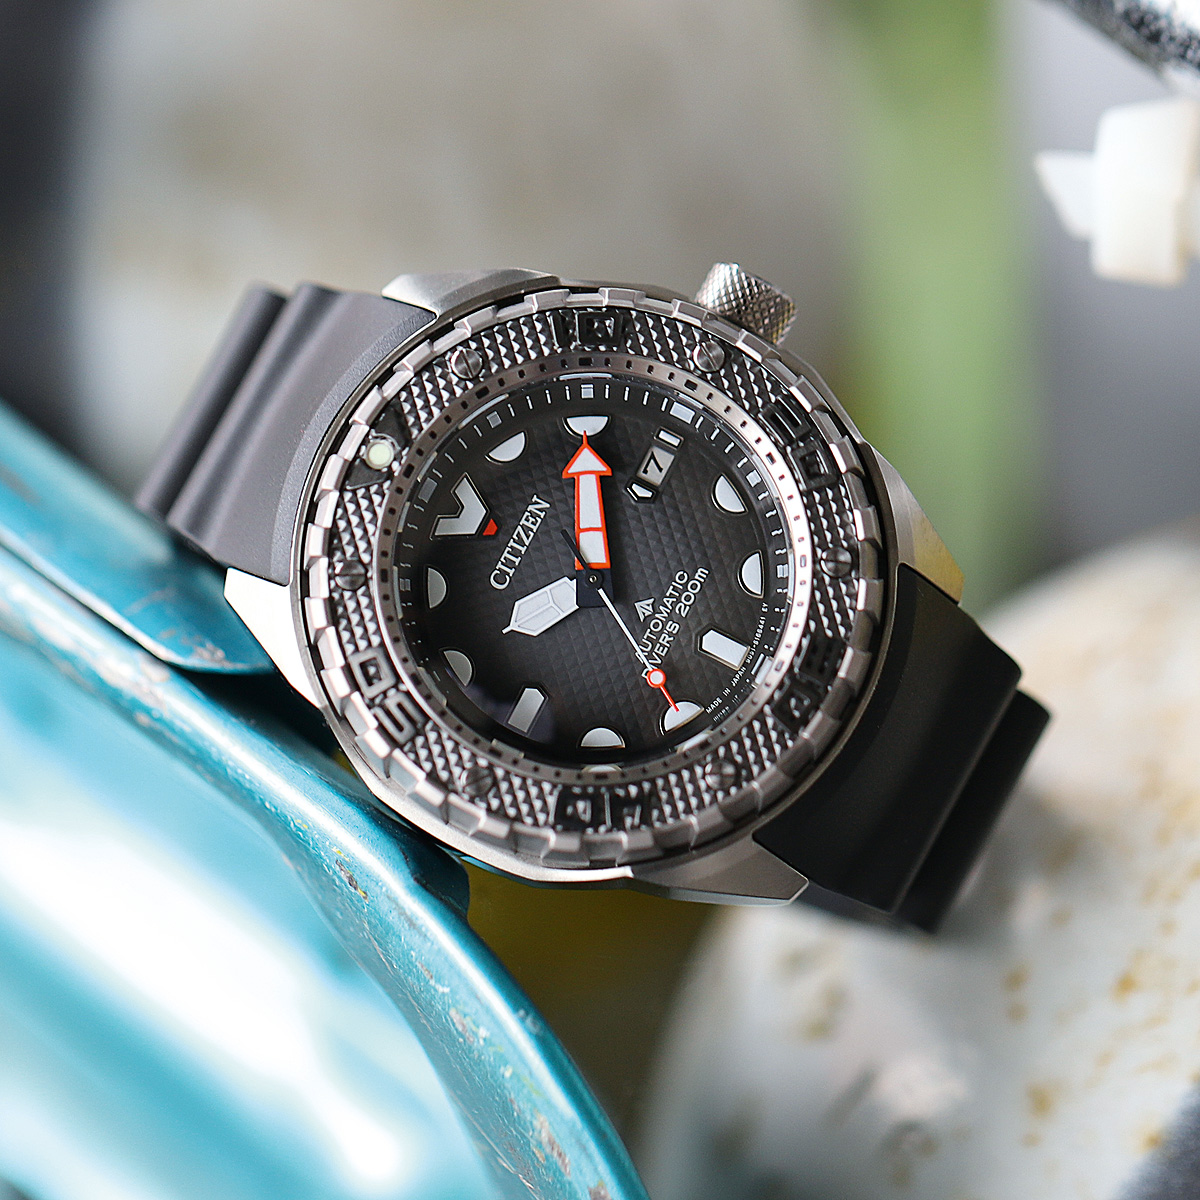 Kaido Diver: Reviewing the Citizen Promaster Mechanical Diver 200M |  WatchTime - USA's  Watch Magazine